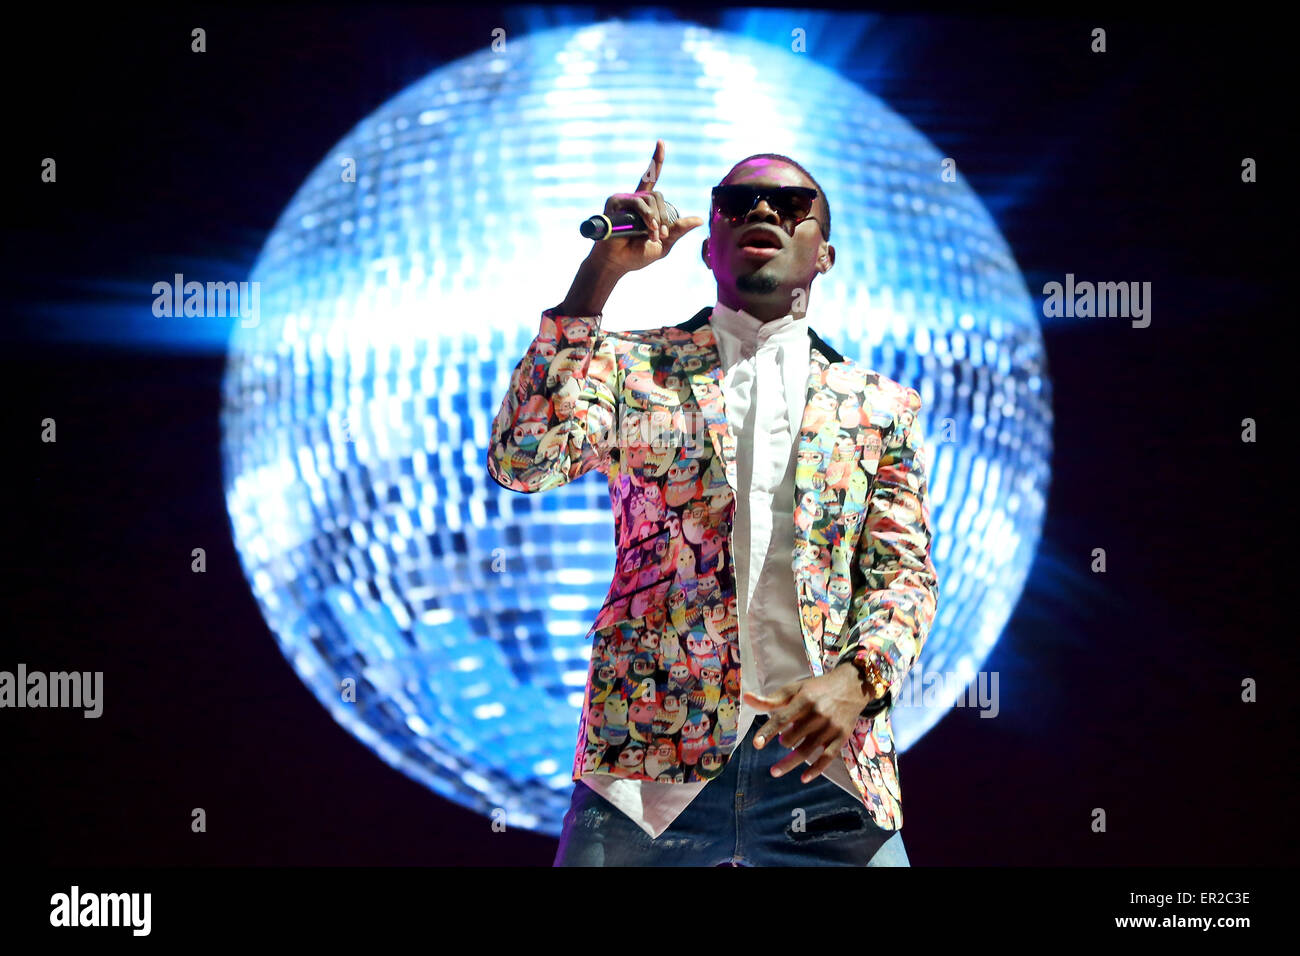 Munich, Germany. 23rd May, 2015.  Singer Omi performes on stage during the FC Bayern Muenchen Bundesliga Champions Dinner at Postpalast on May 23, 2015 in Munich, Germany. Credit:  kolvenbach/Alamy Live News Stock Photo